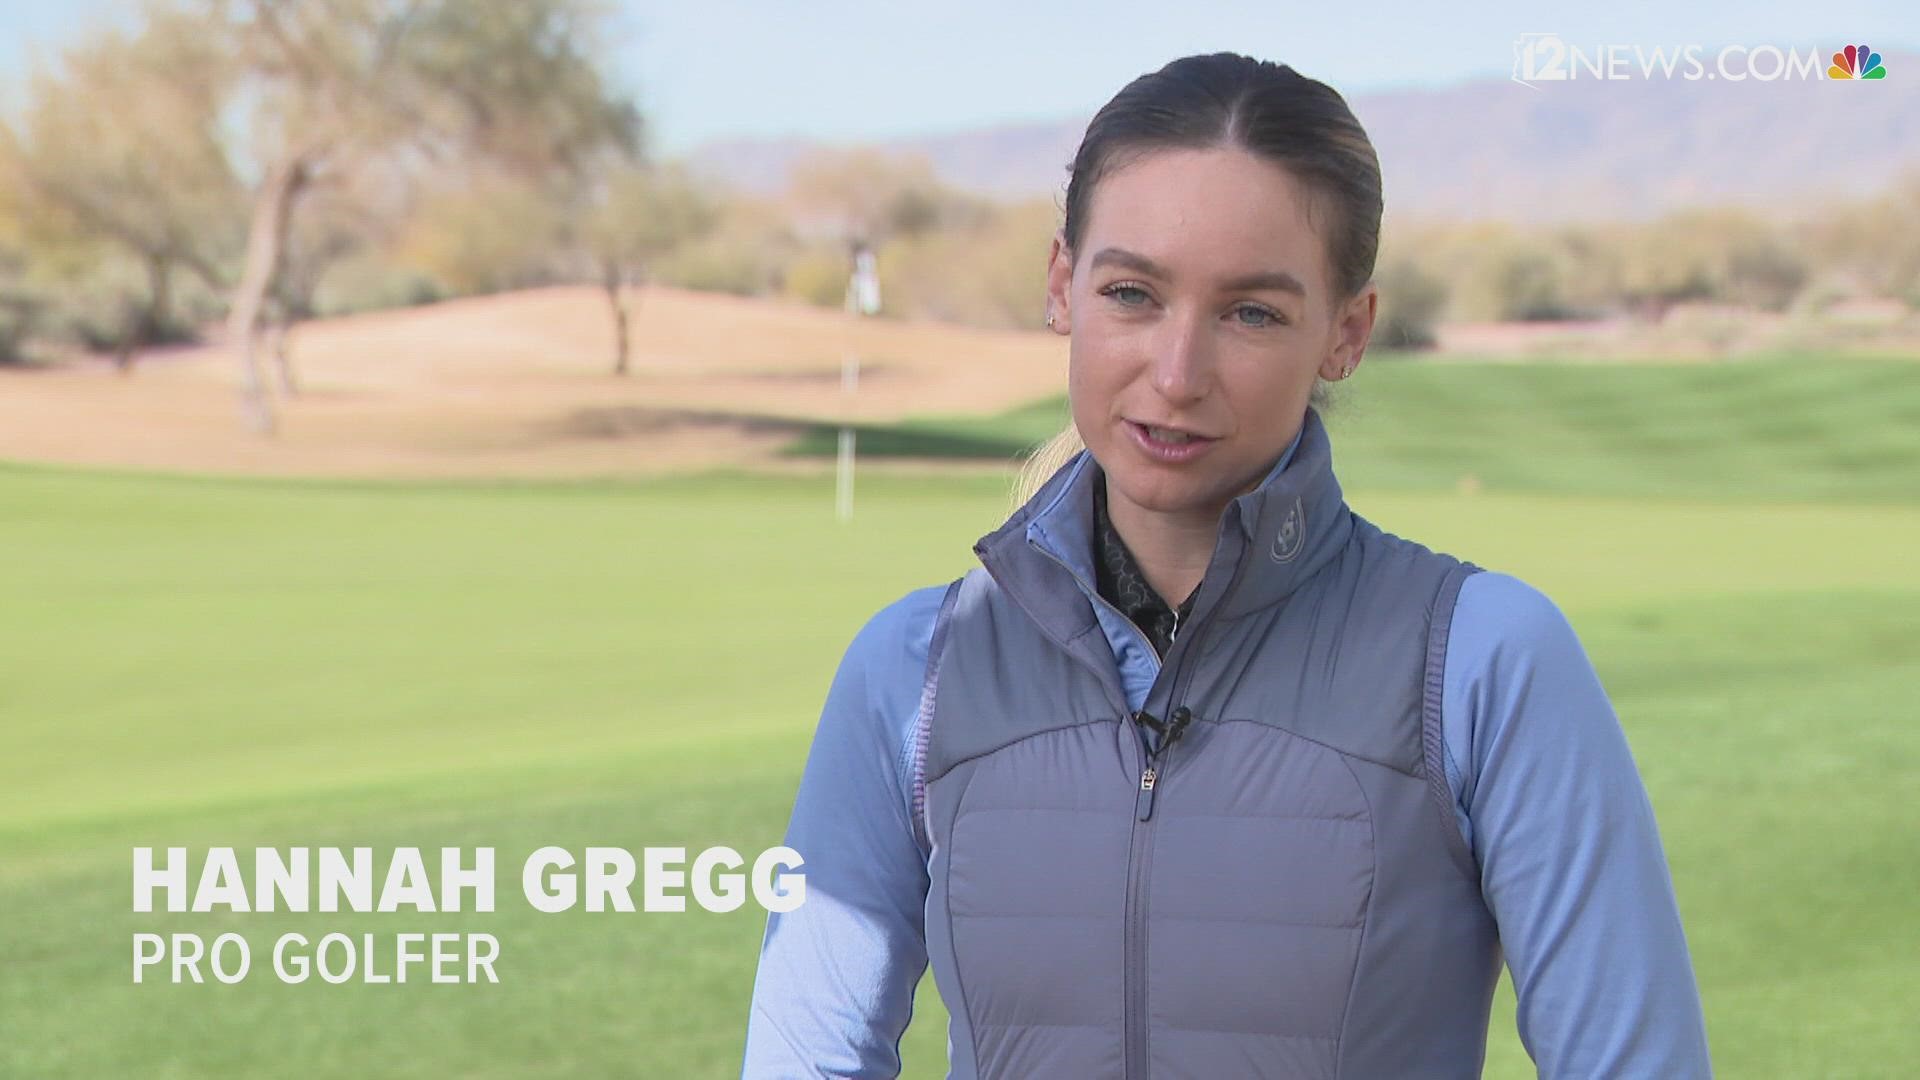 Pro golfer Hannah Gregg shares what life is like for her on tour as she tries to earn her LPGA Tour card.